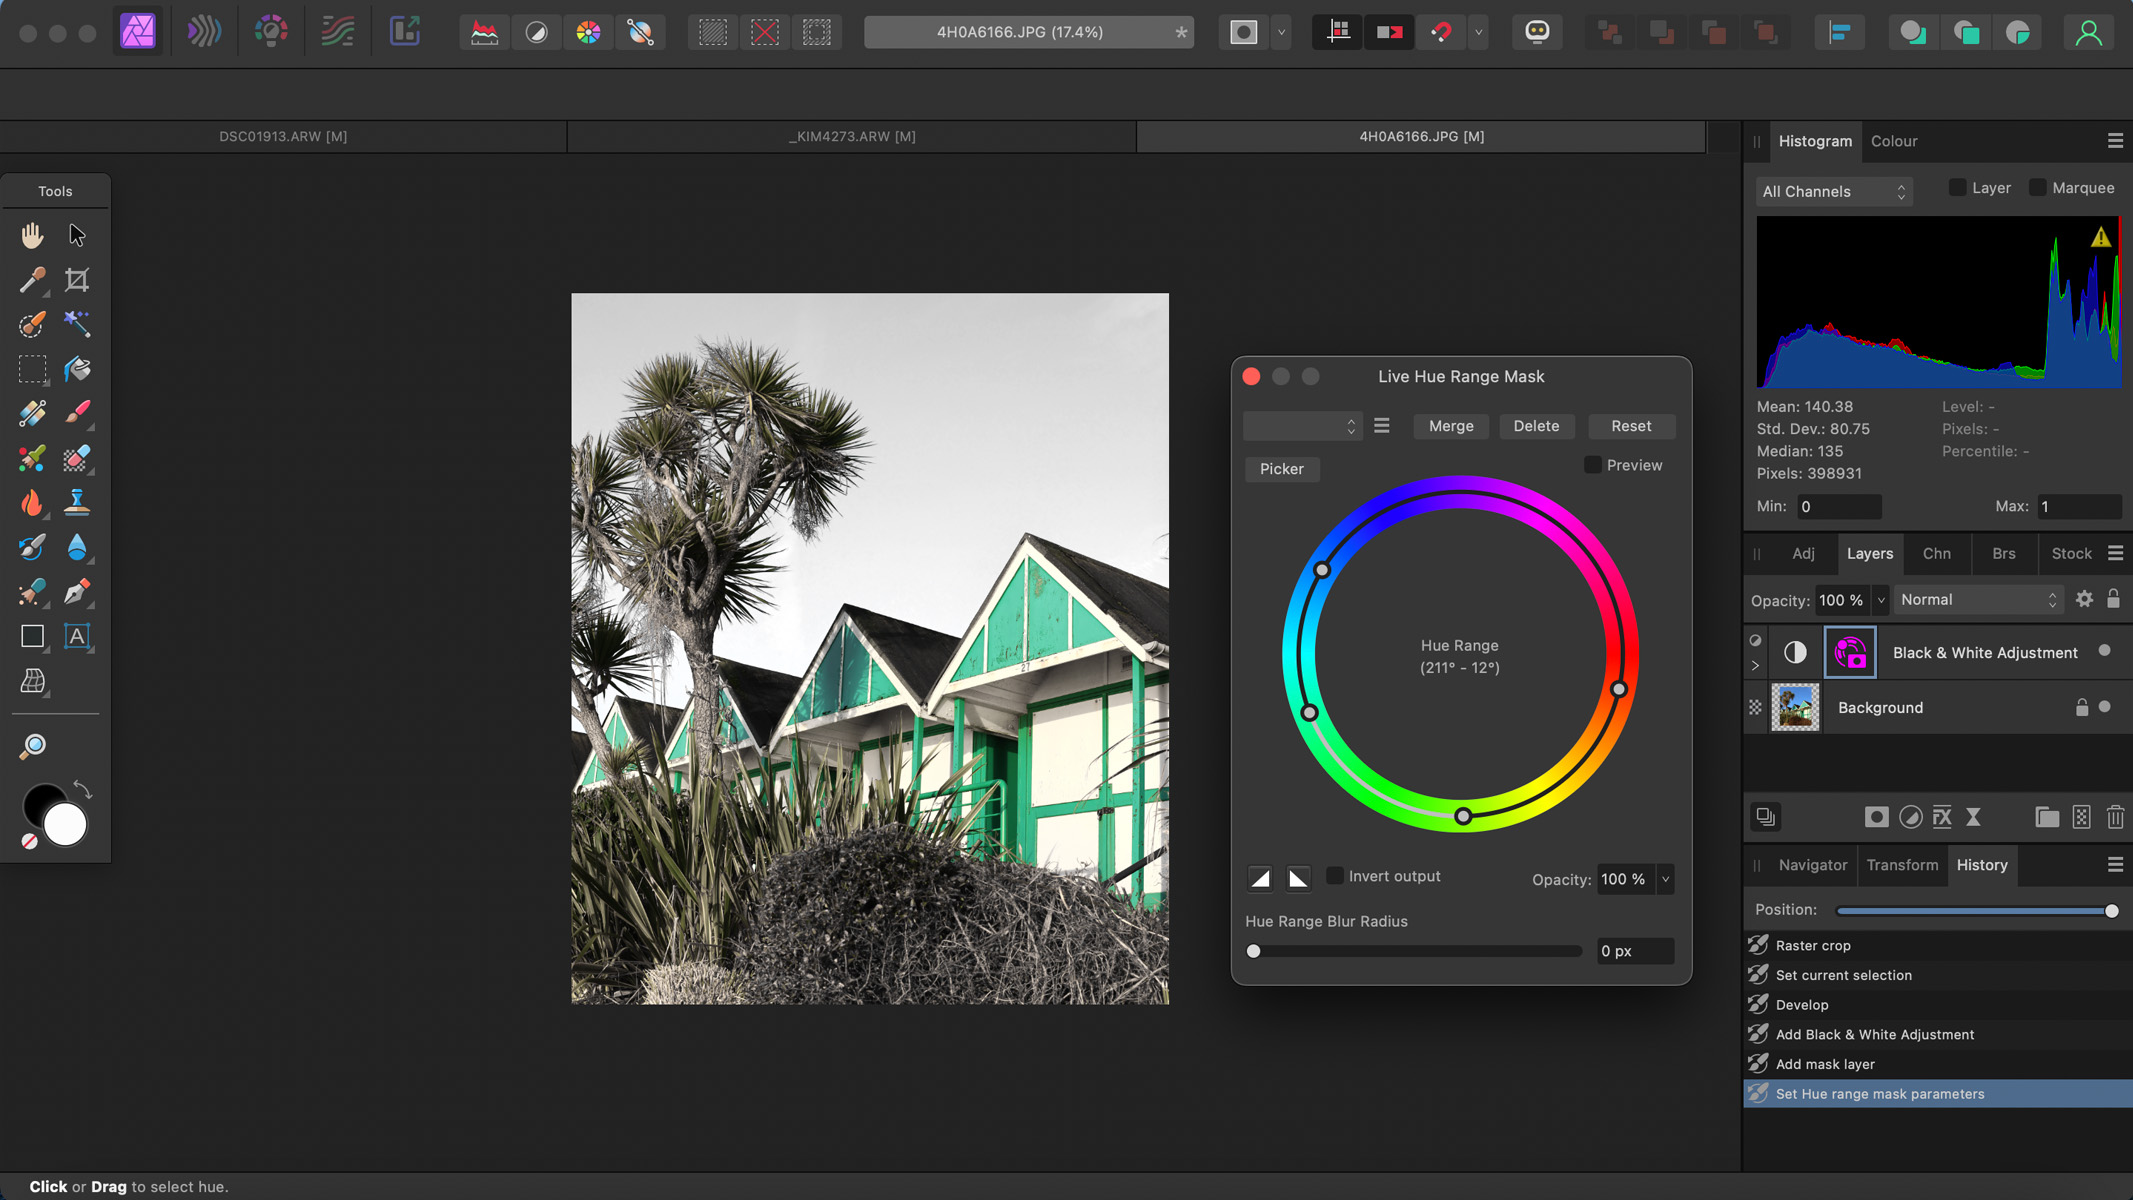 Live Hue Range Mask being used in Affinity Photo 2